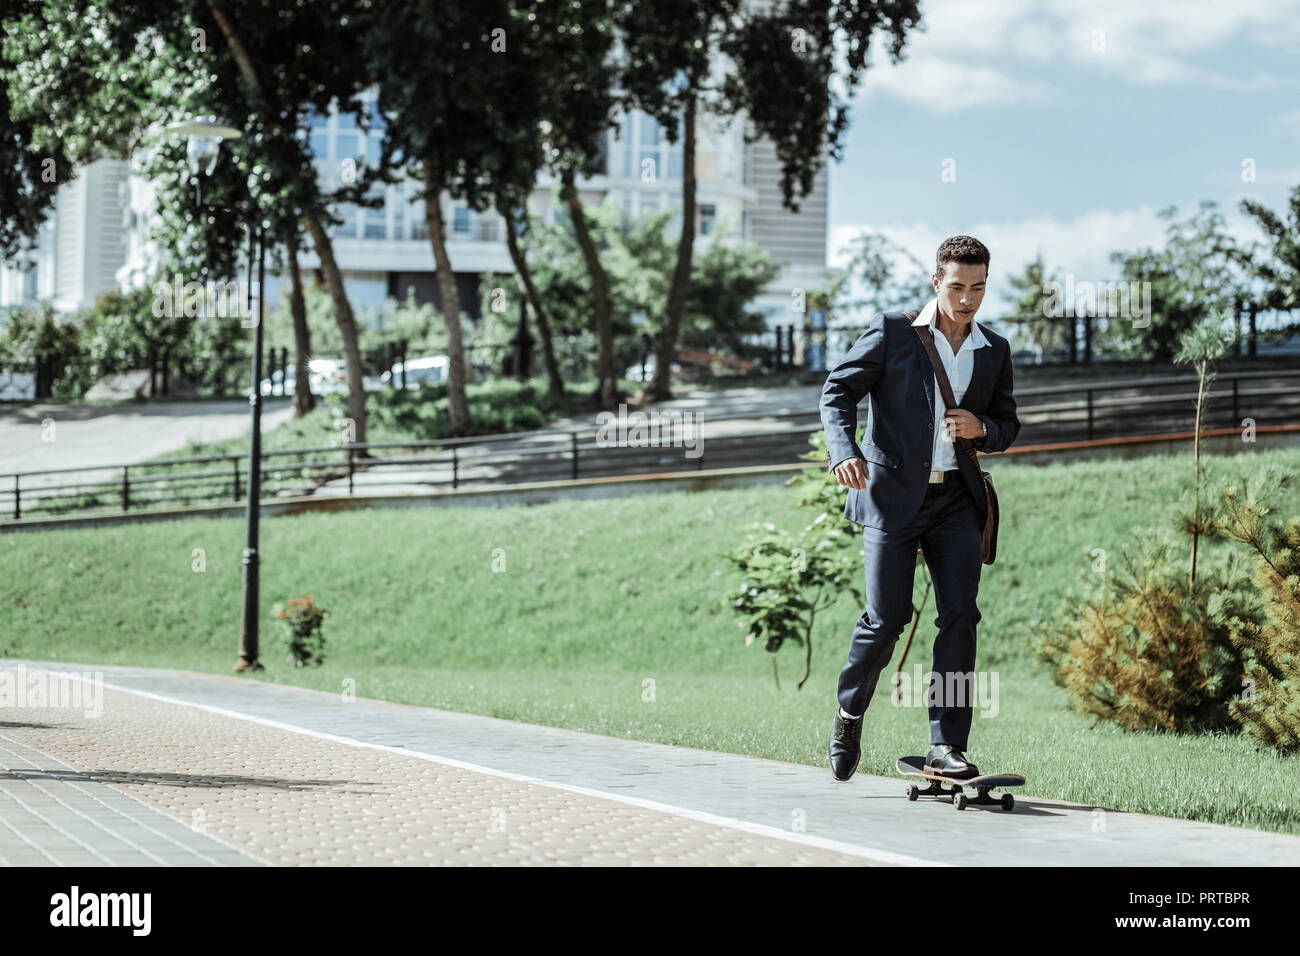 Young male student practicing riding on skateboard Stock Photo